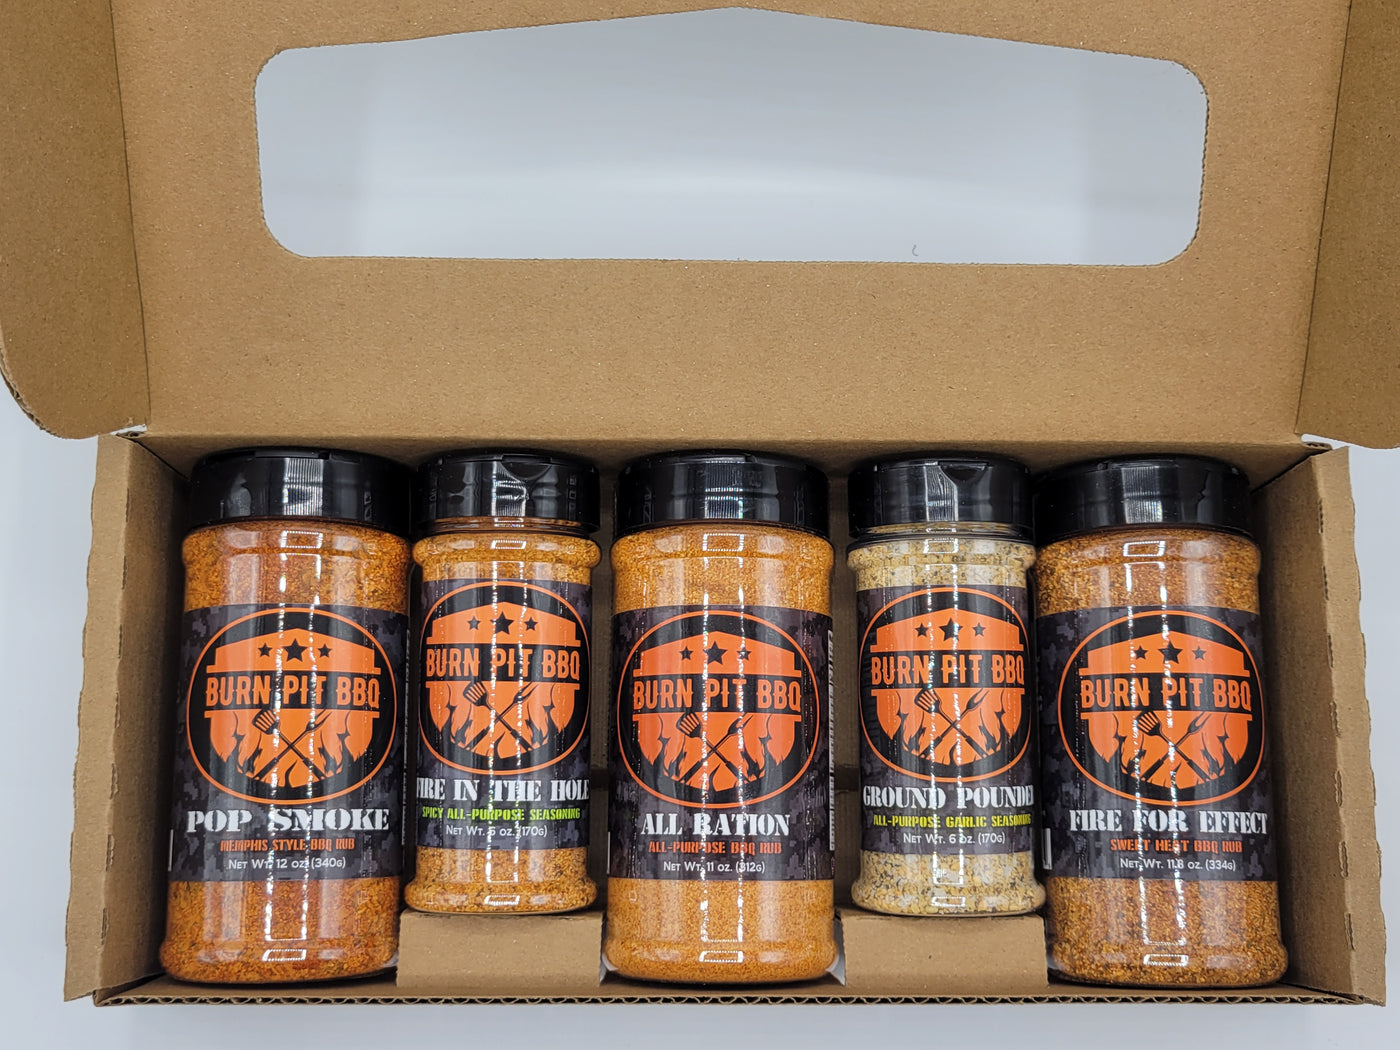 Rubs & Seasonings Gift 5-Pack - Burn Pit BBQ's Top Selling Rubs & Seasonings In One Box - Great For Gifts Or For Yourself